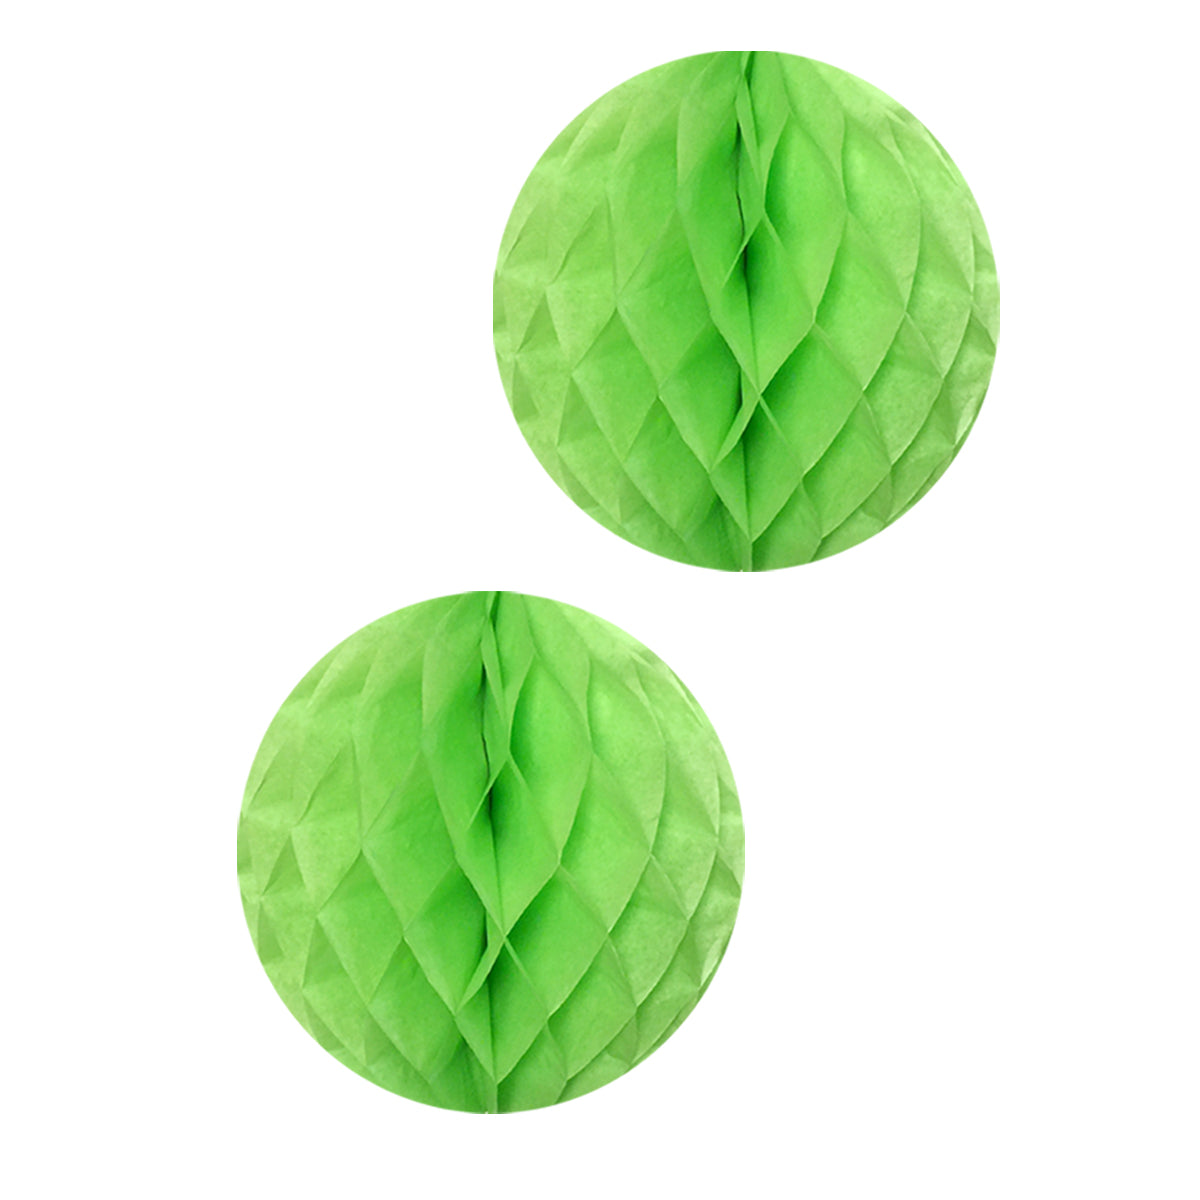 Wrapables Mini Honeycomb Ball Party Decorations for Weddings, Birthday Parties, Baby Showers and Nursery Decor (Set of 20), 1 inch, Lime Green